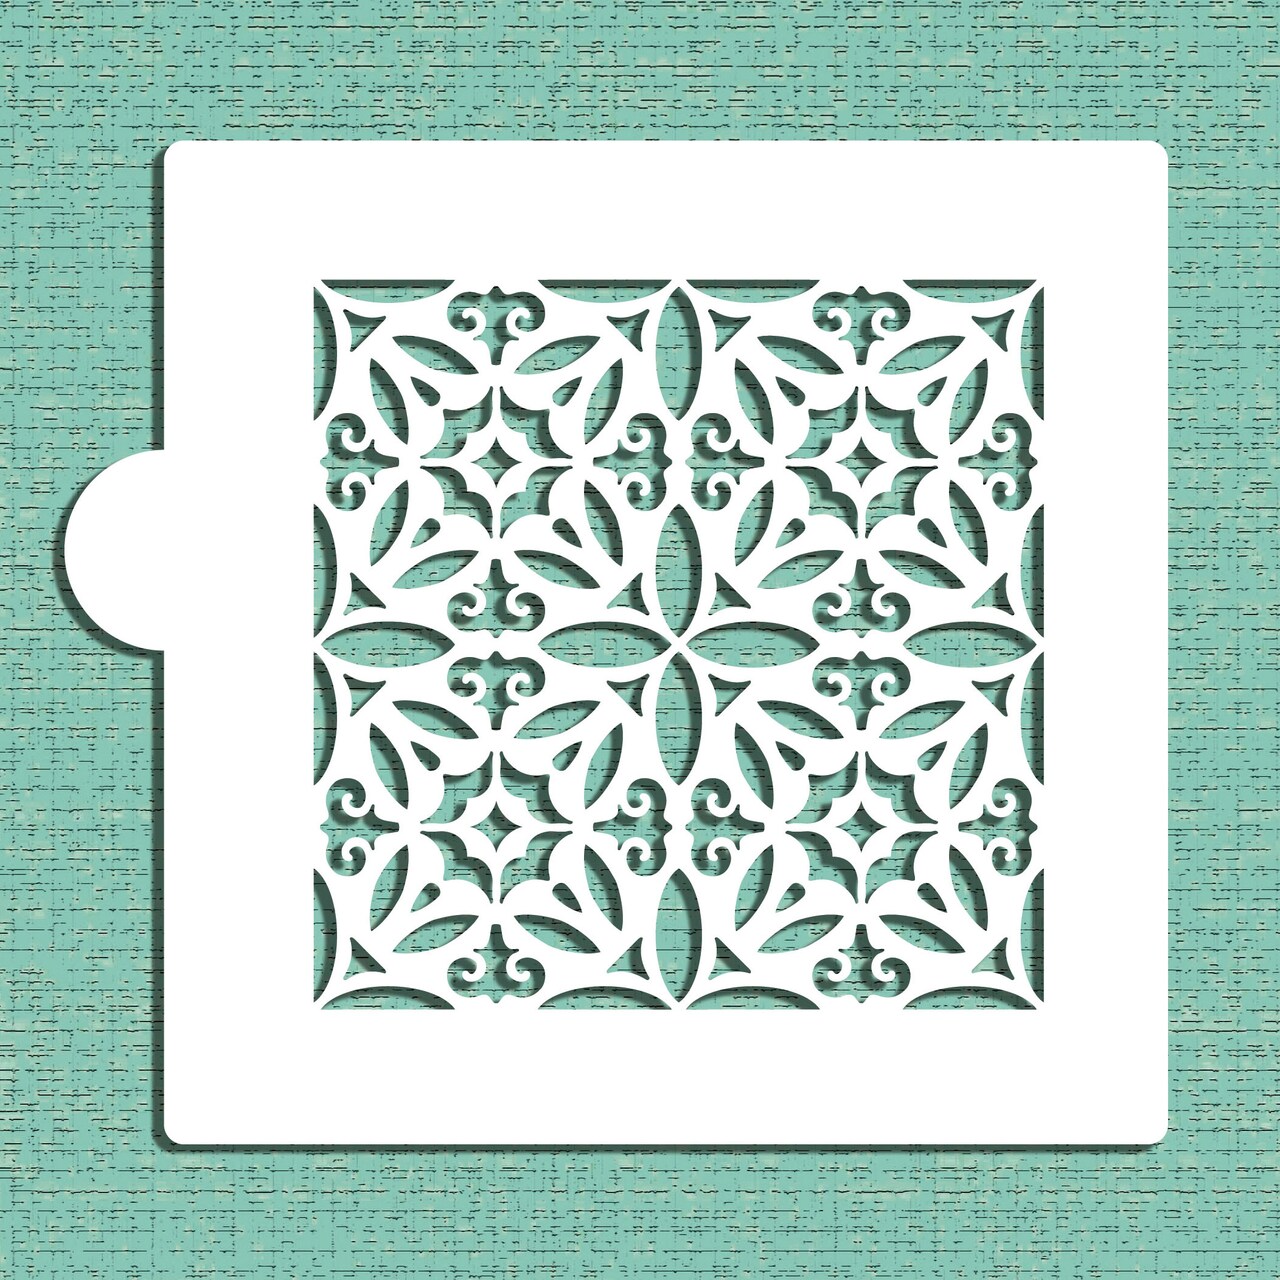 Old World Tile Cookie &#x26; Craft Stencil | CM132 by Designer Stencils | Cookie Decorating Tools | Baking Stencils for Royal Icing, Airbrush, Dusting Powder | Craft Stencils for Canvas, Paper, Wood | Reusable Food Grade Stencil